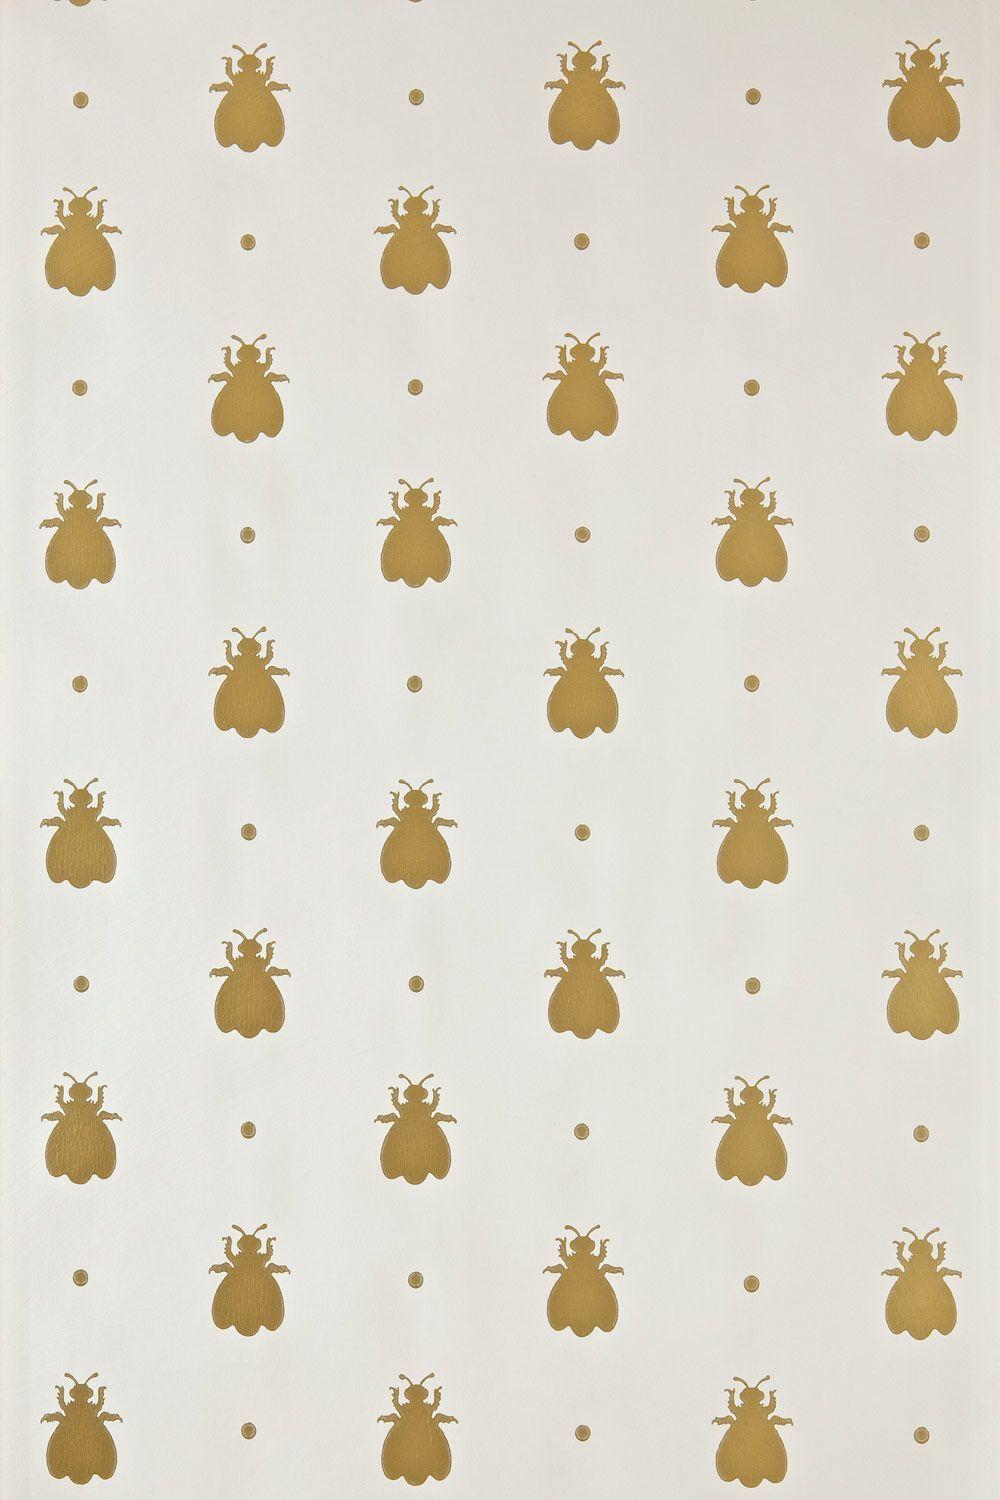 How cute is this wallpaper? Would kove to use this somewhere down